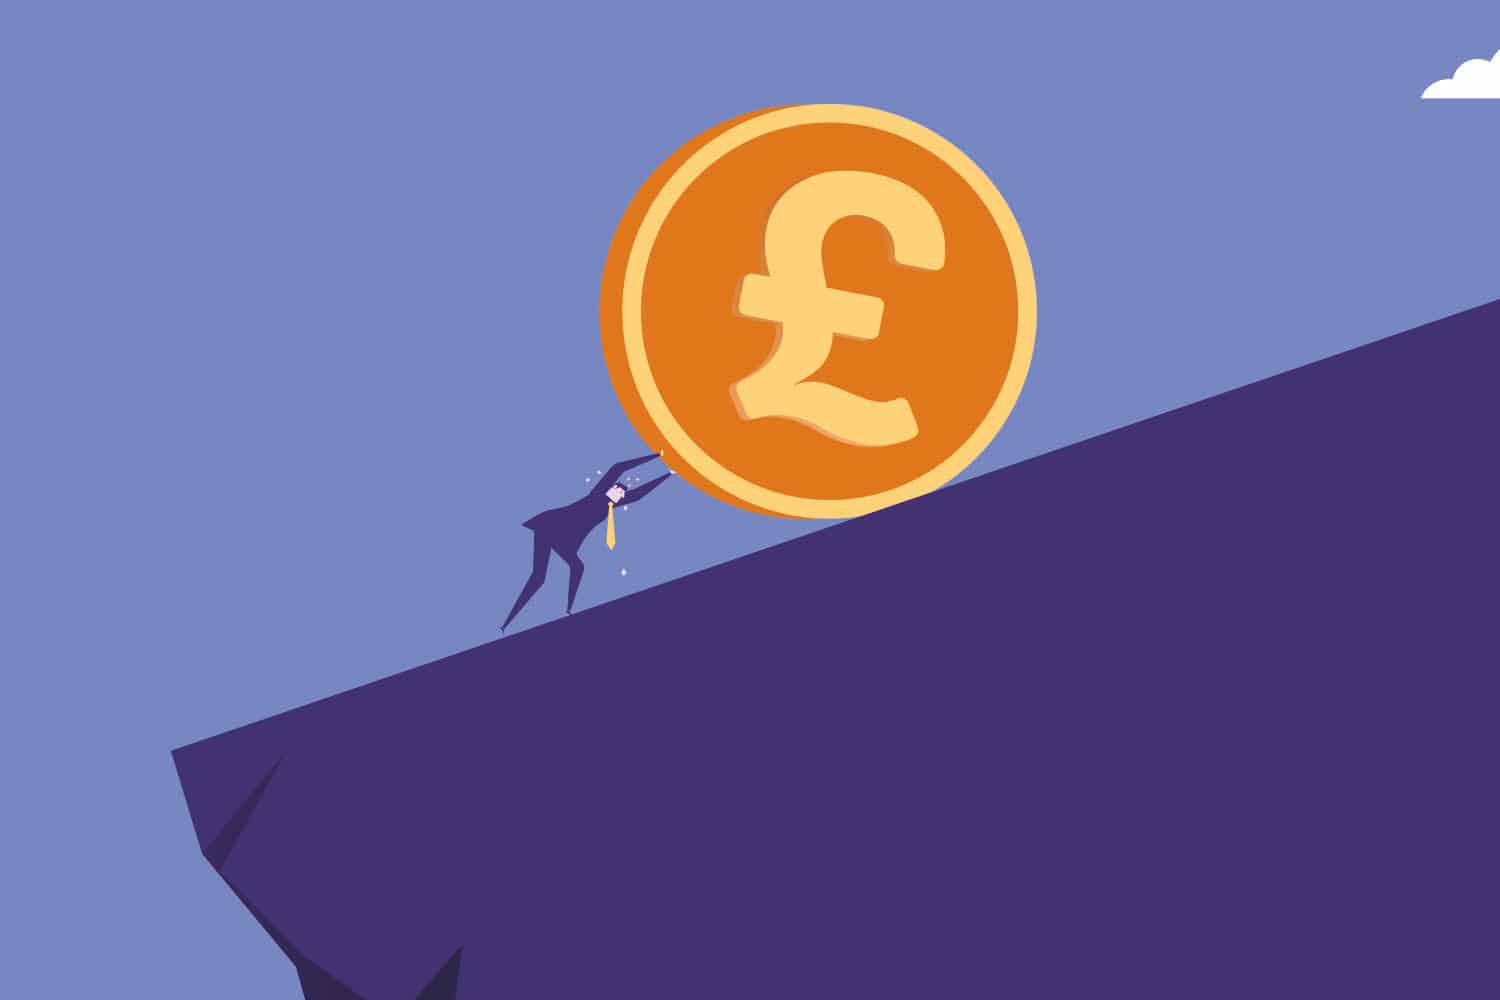 male figure pushing enormous pound coin up cliff